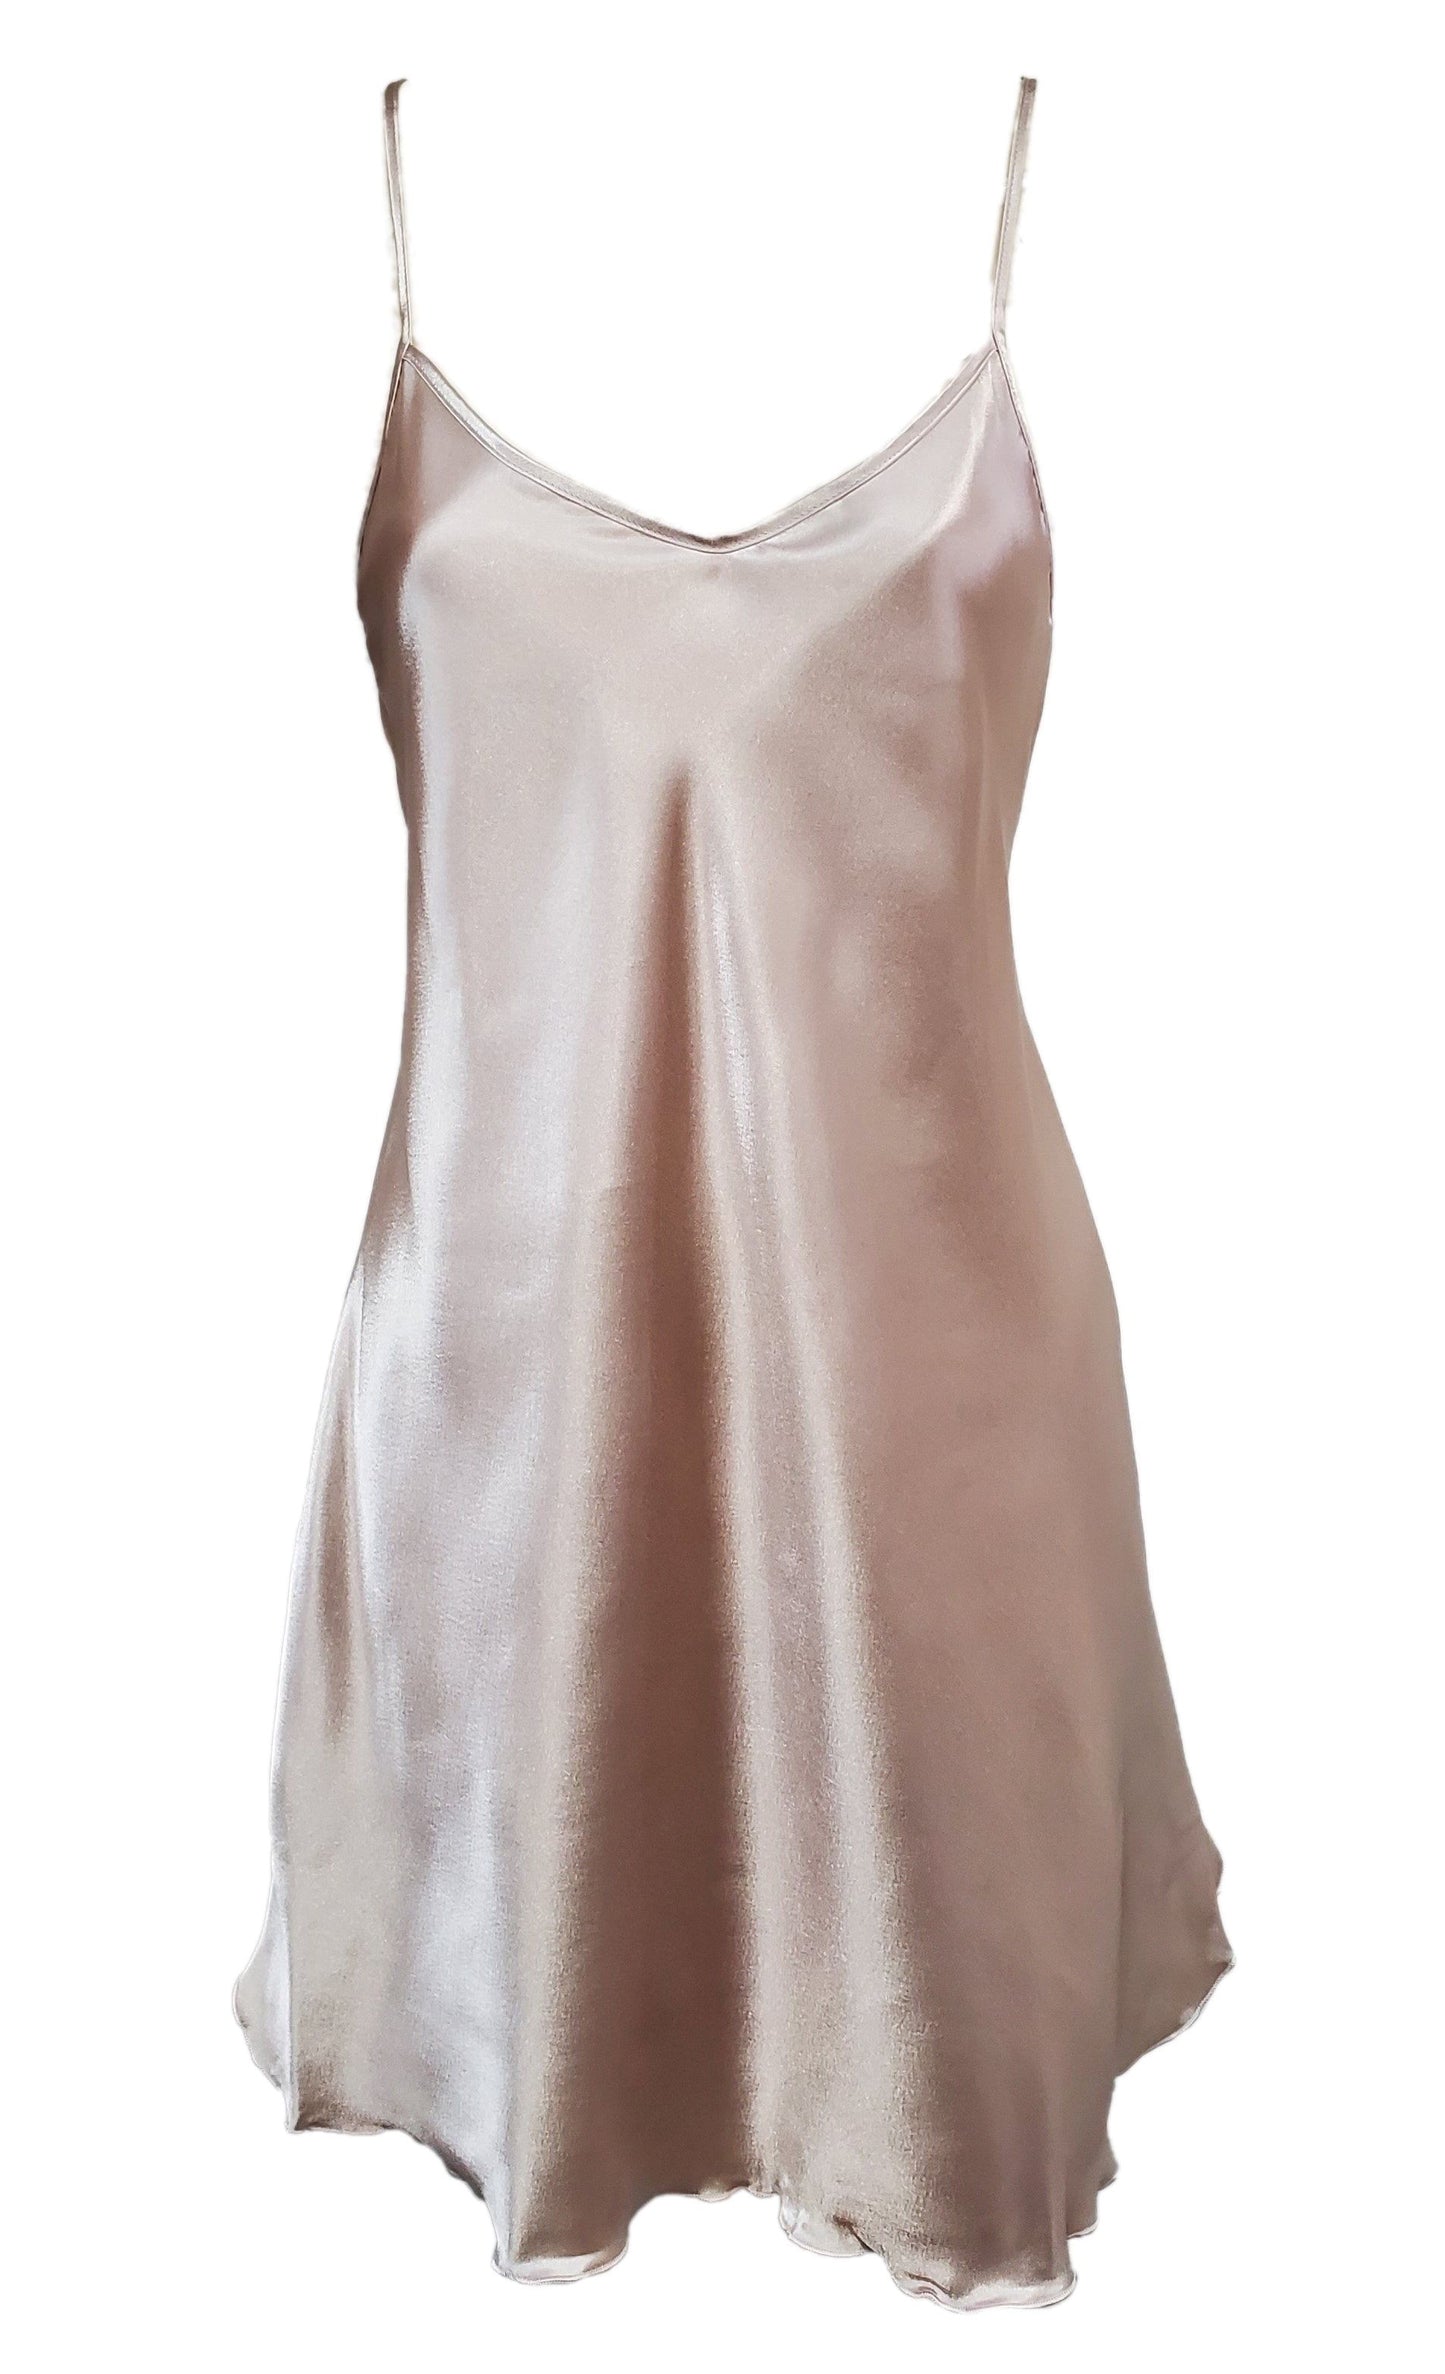 Classic and simple satin babydoll from the Basic line by Andra from Italy.